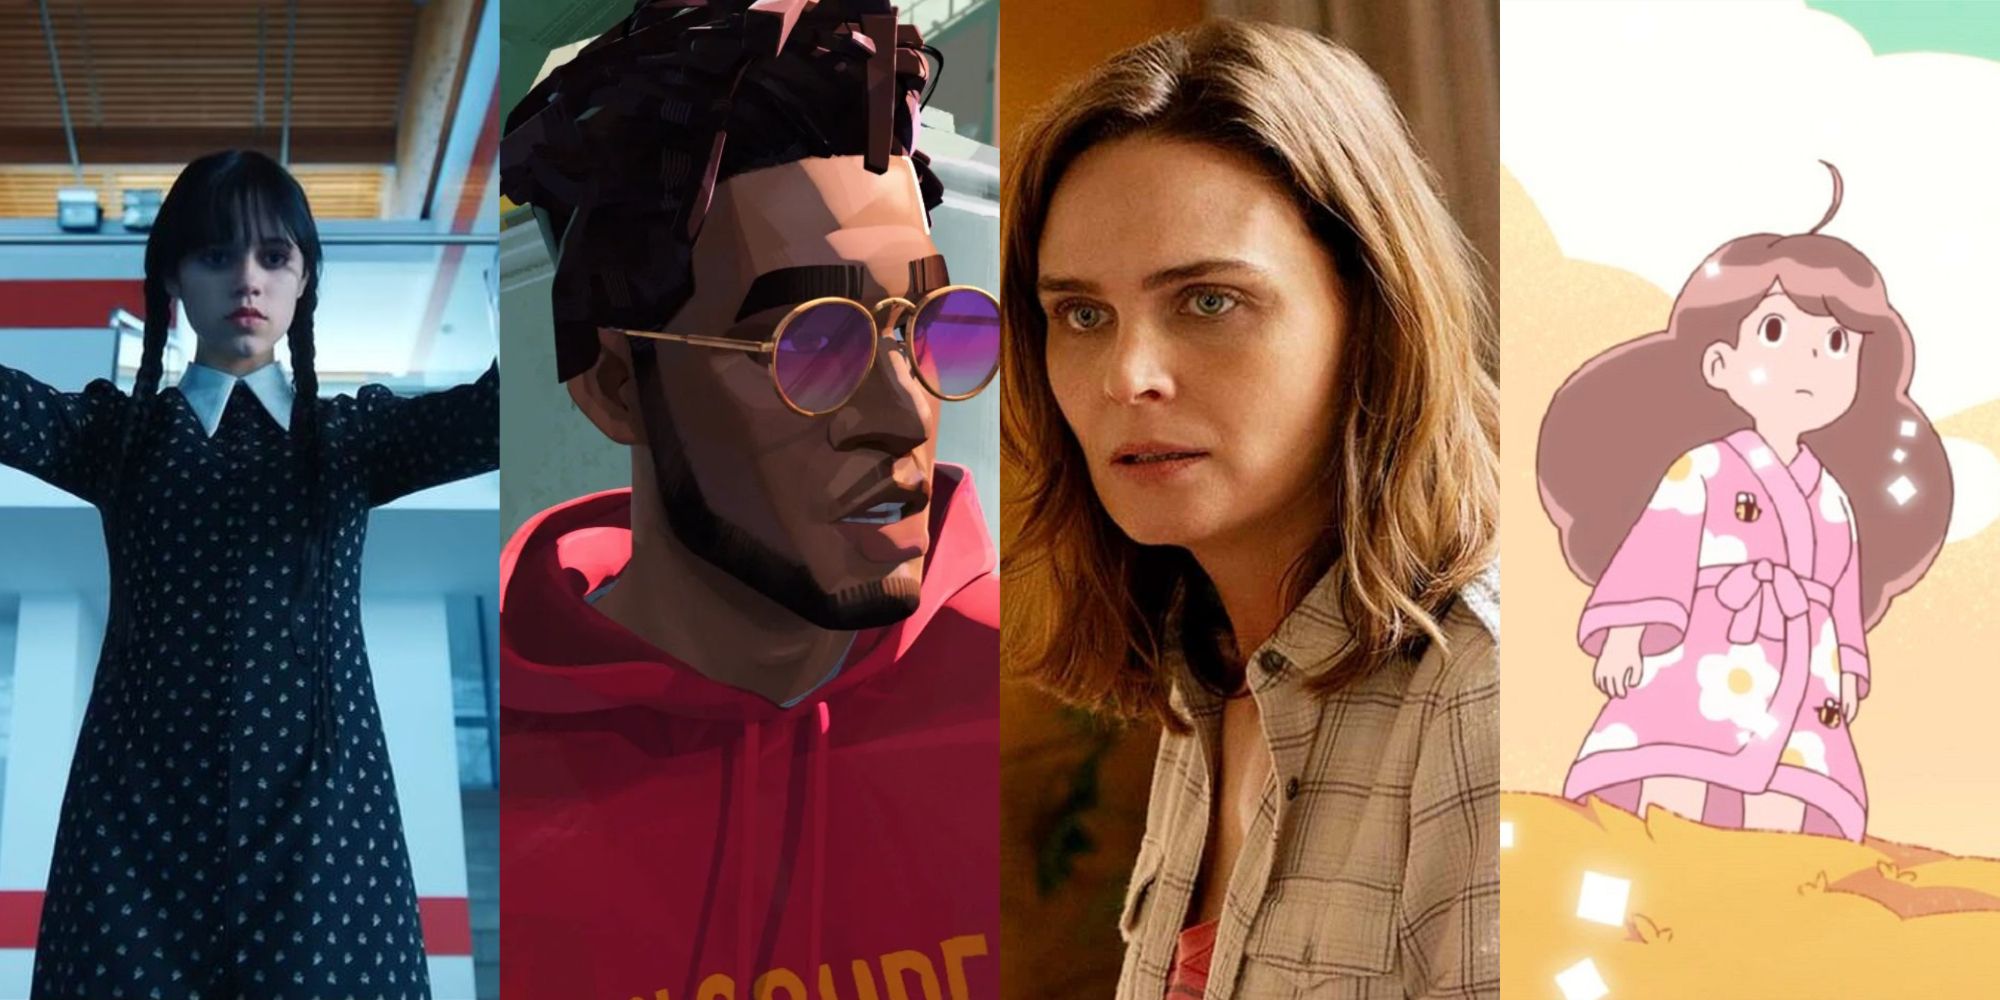 The 10 Most Anticipated Netflix Films and TV Shows in 2022